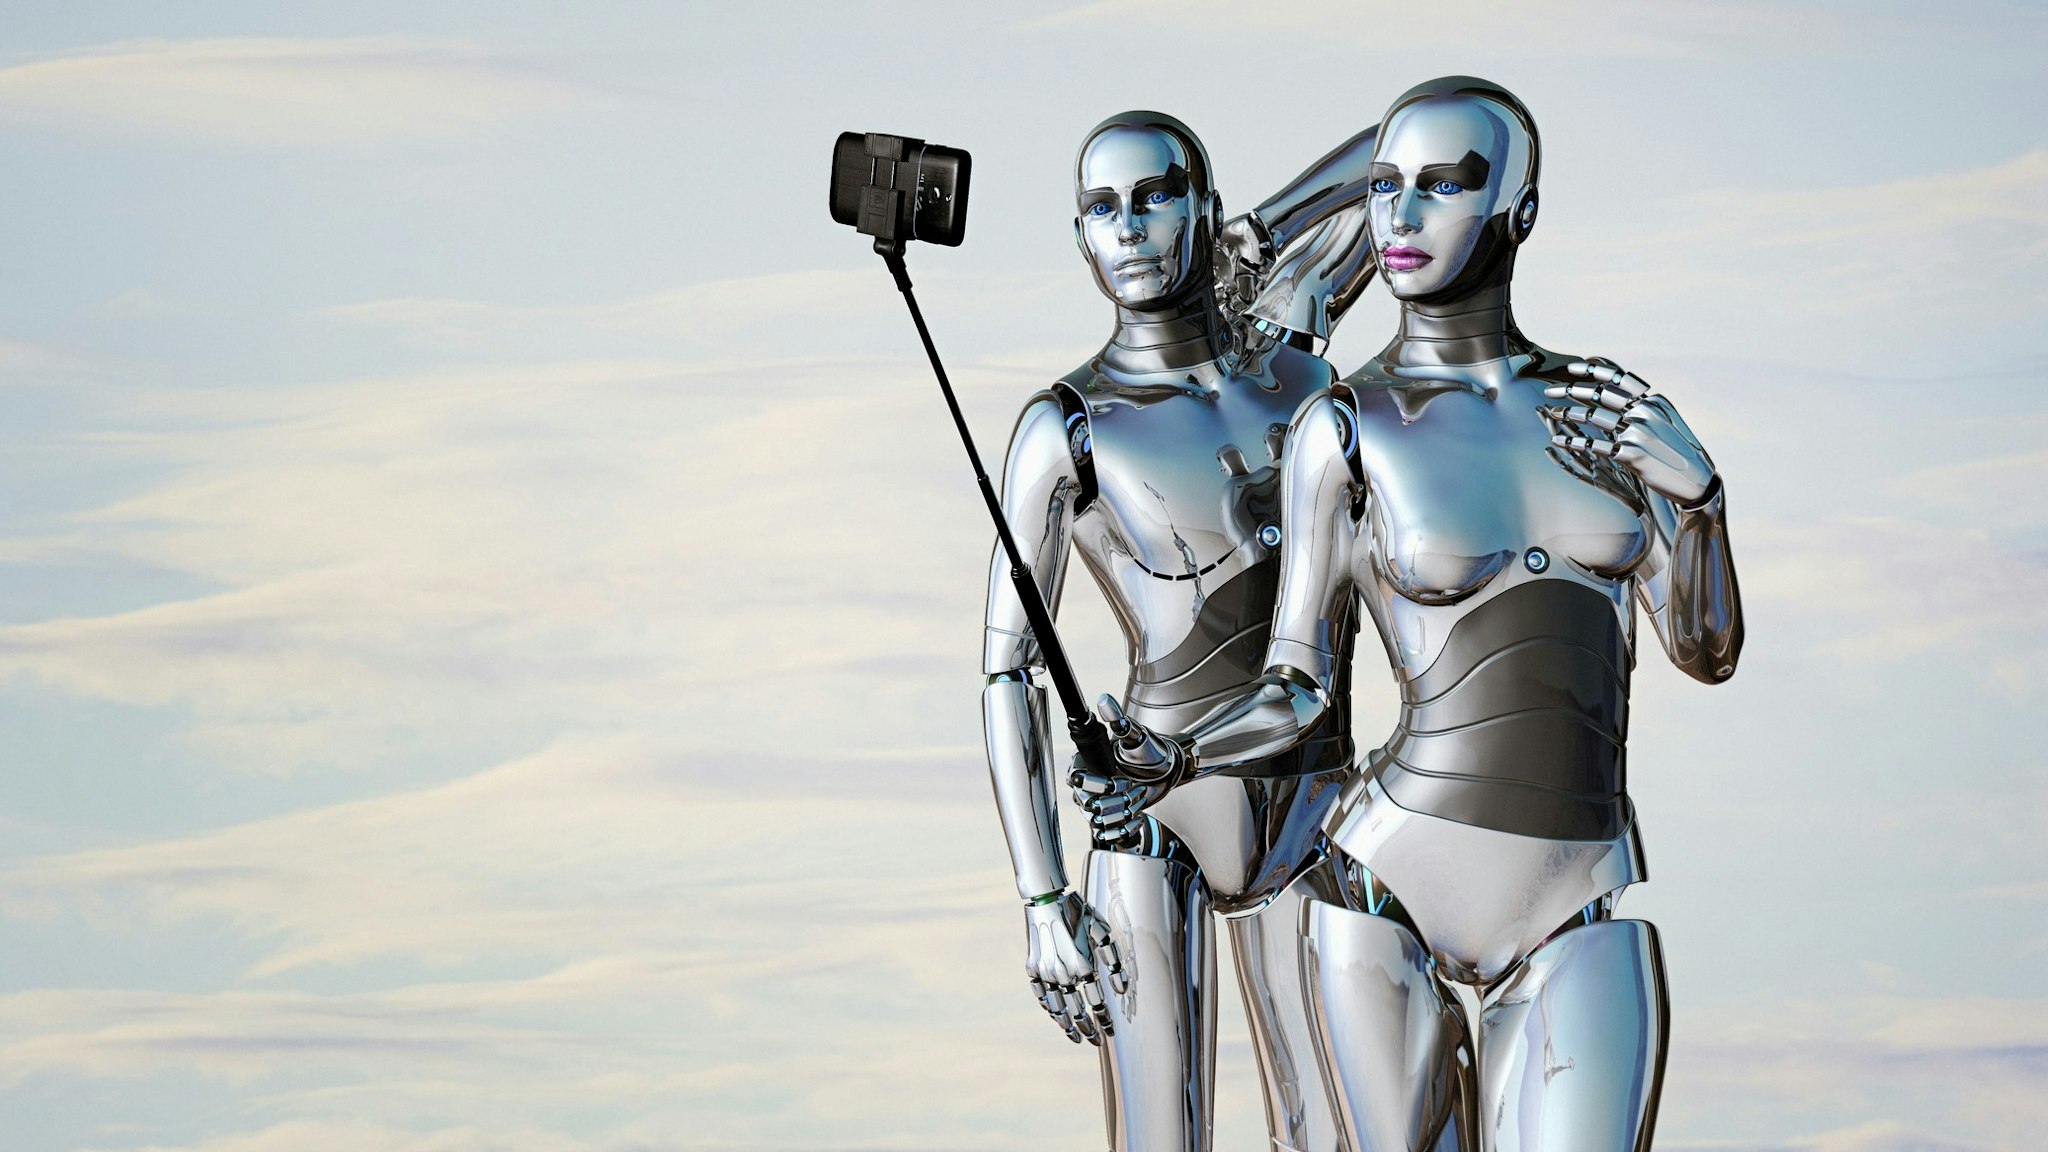 Robot couple posing for cell phone selfie